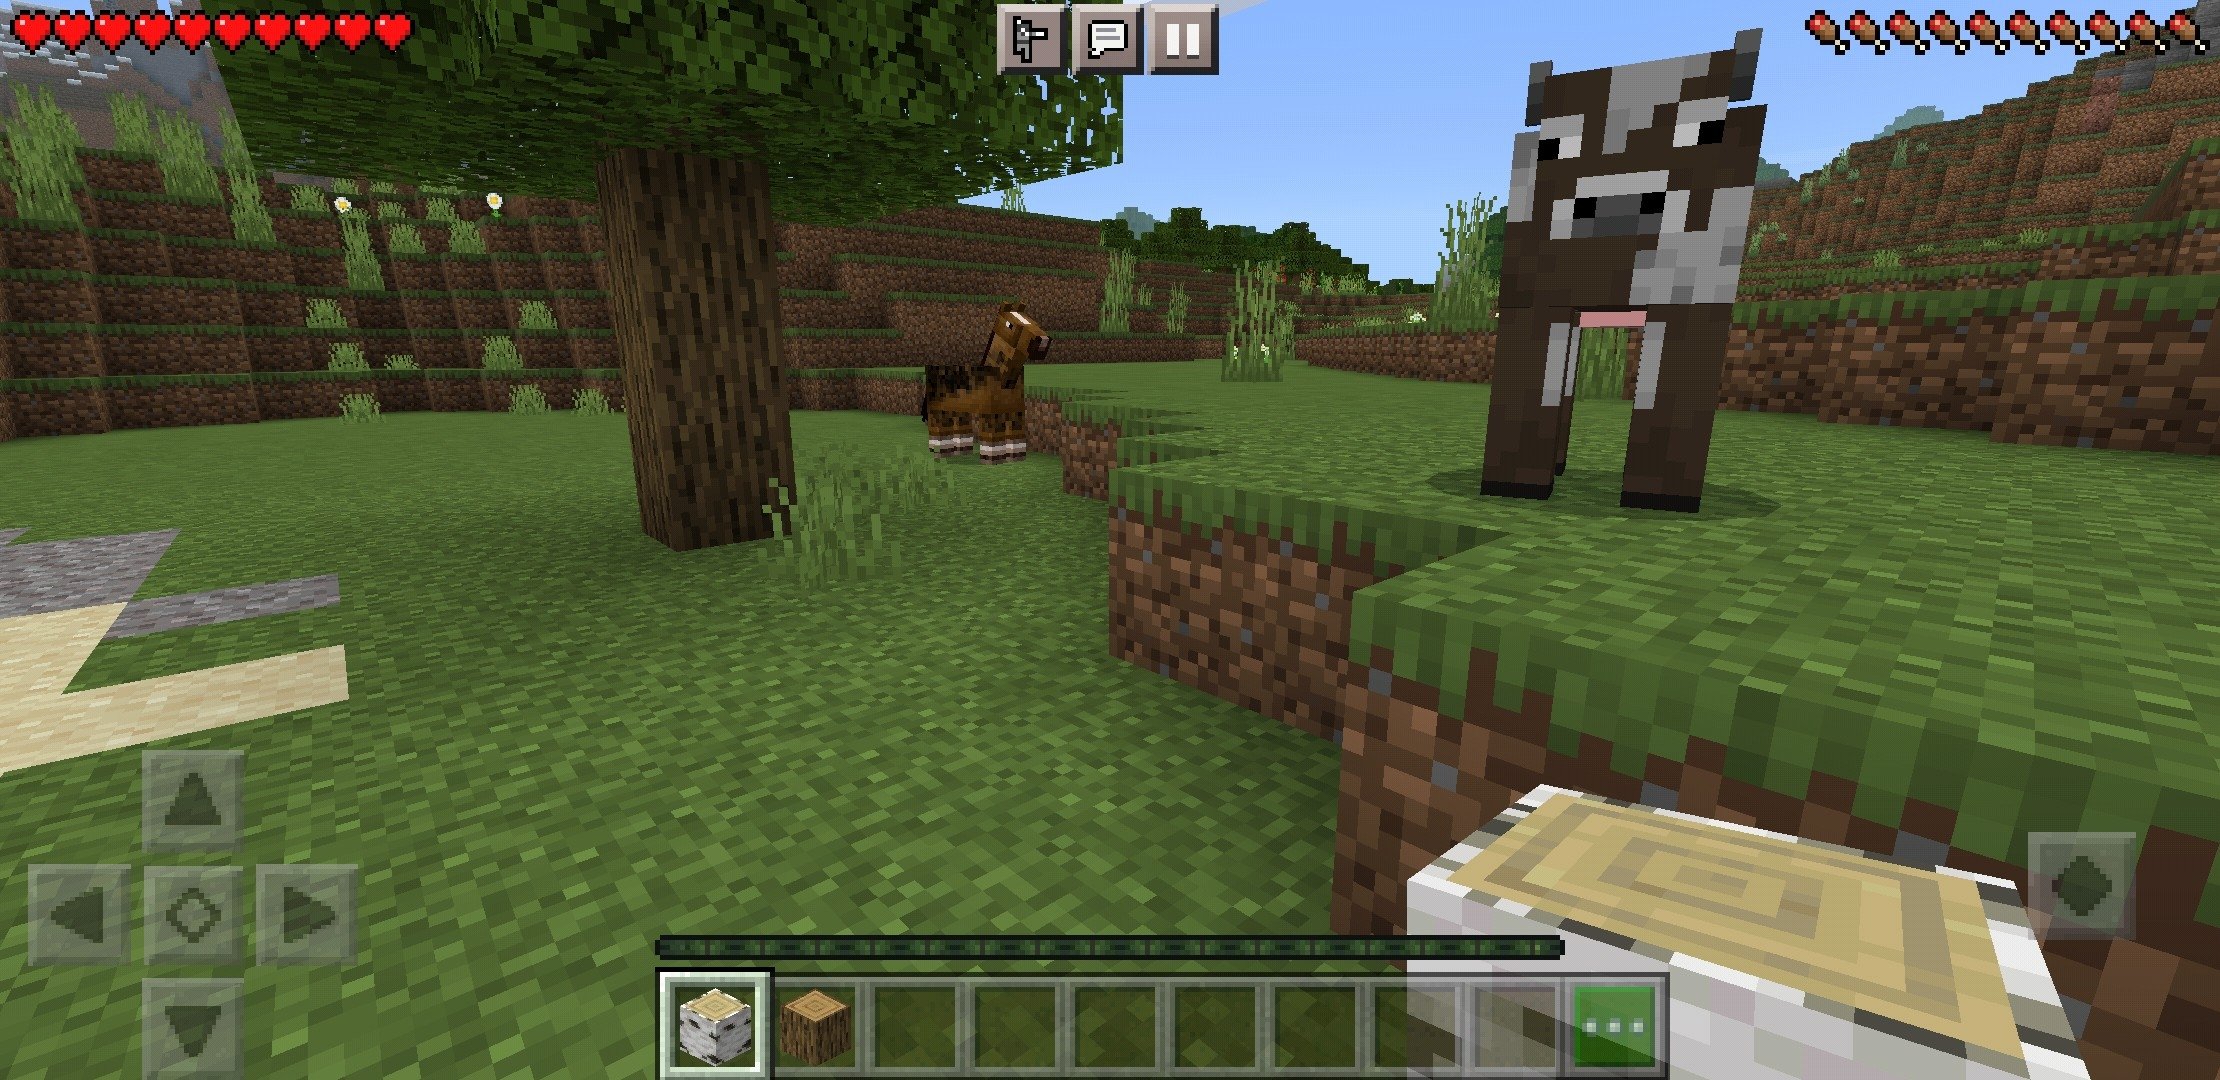 Minecraft 11.111.11.11 - Download for Android APK Free